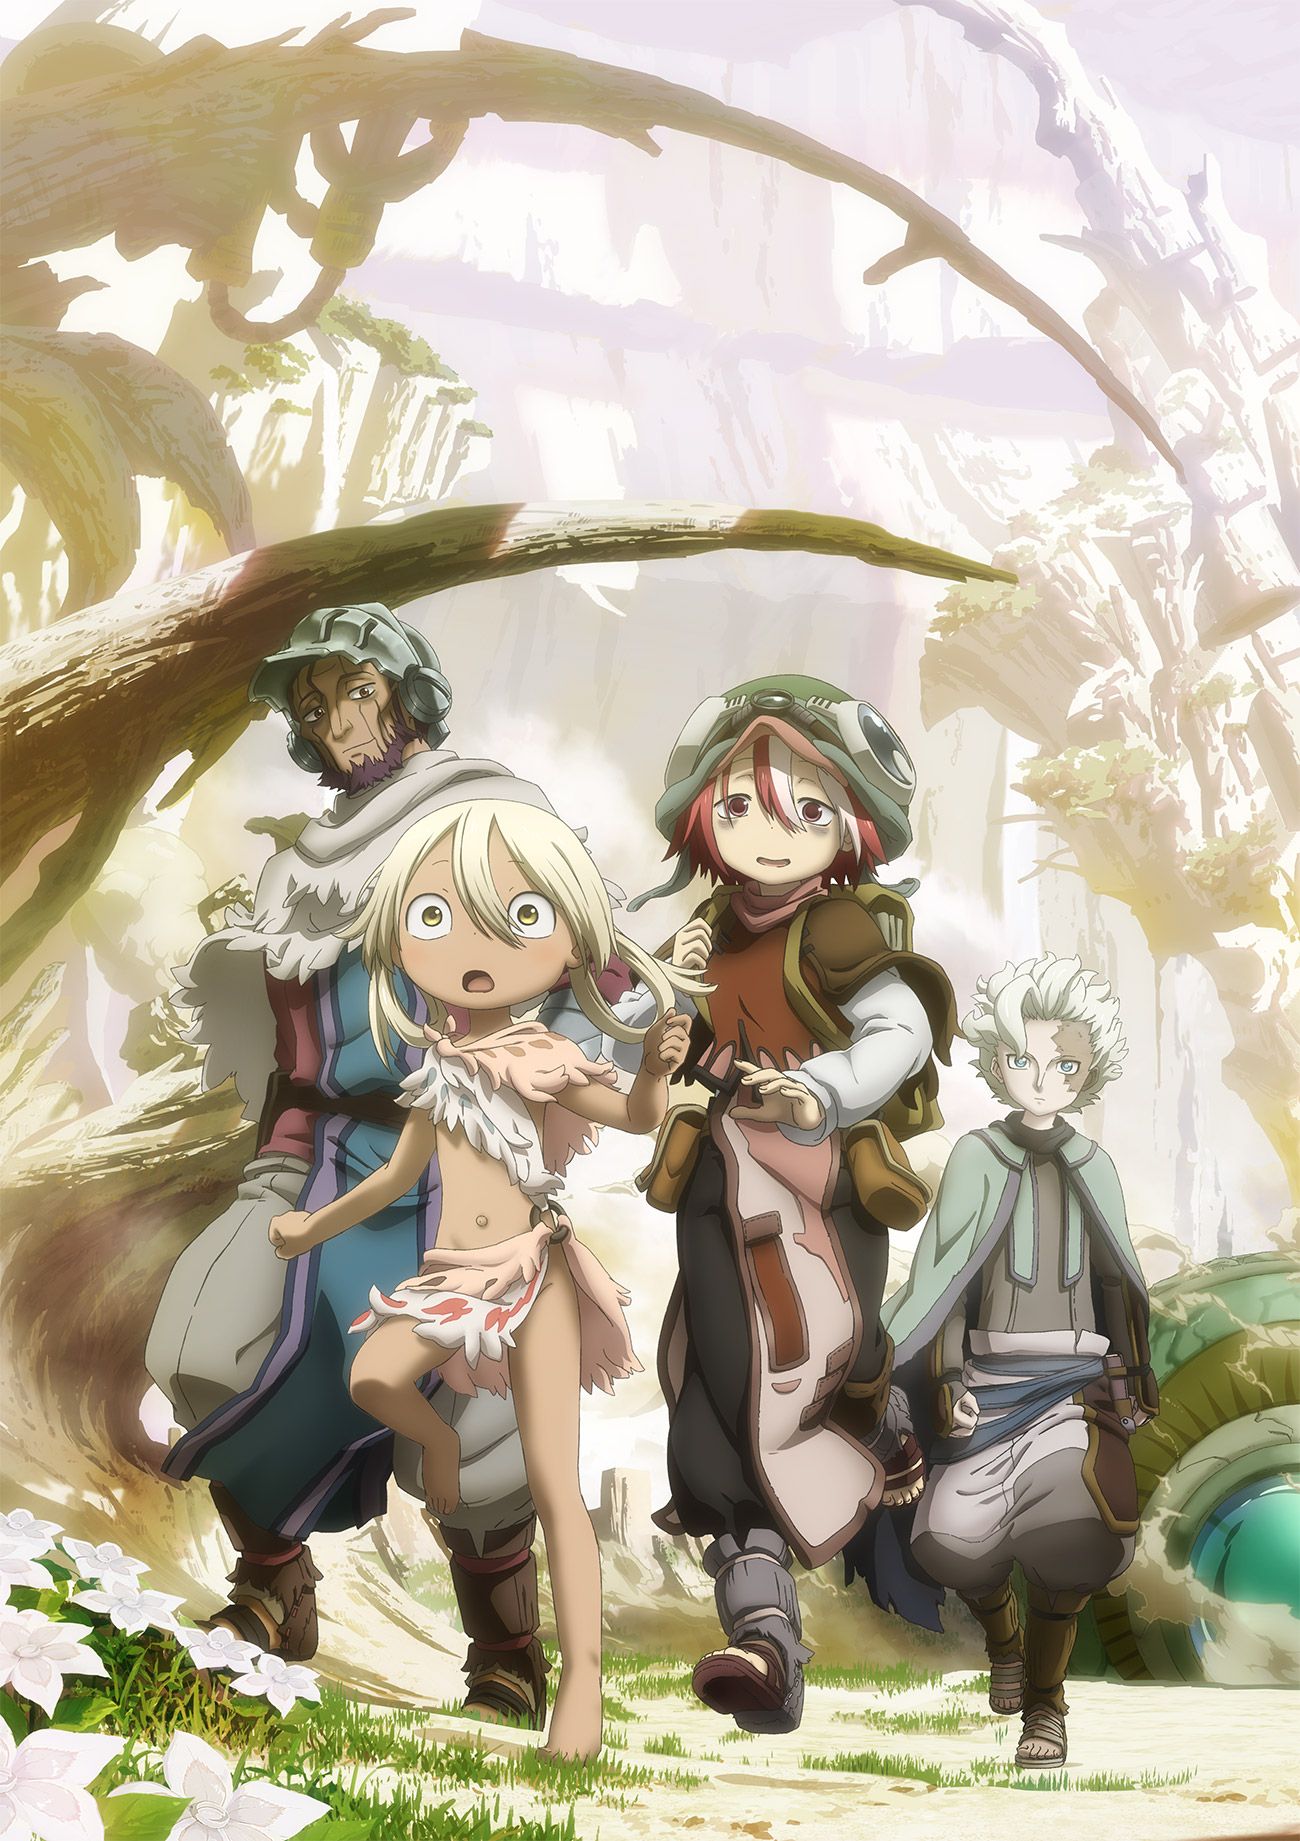 Made_in_Abyss_S2_anime_visual_2